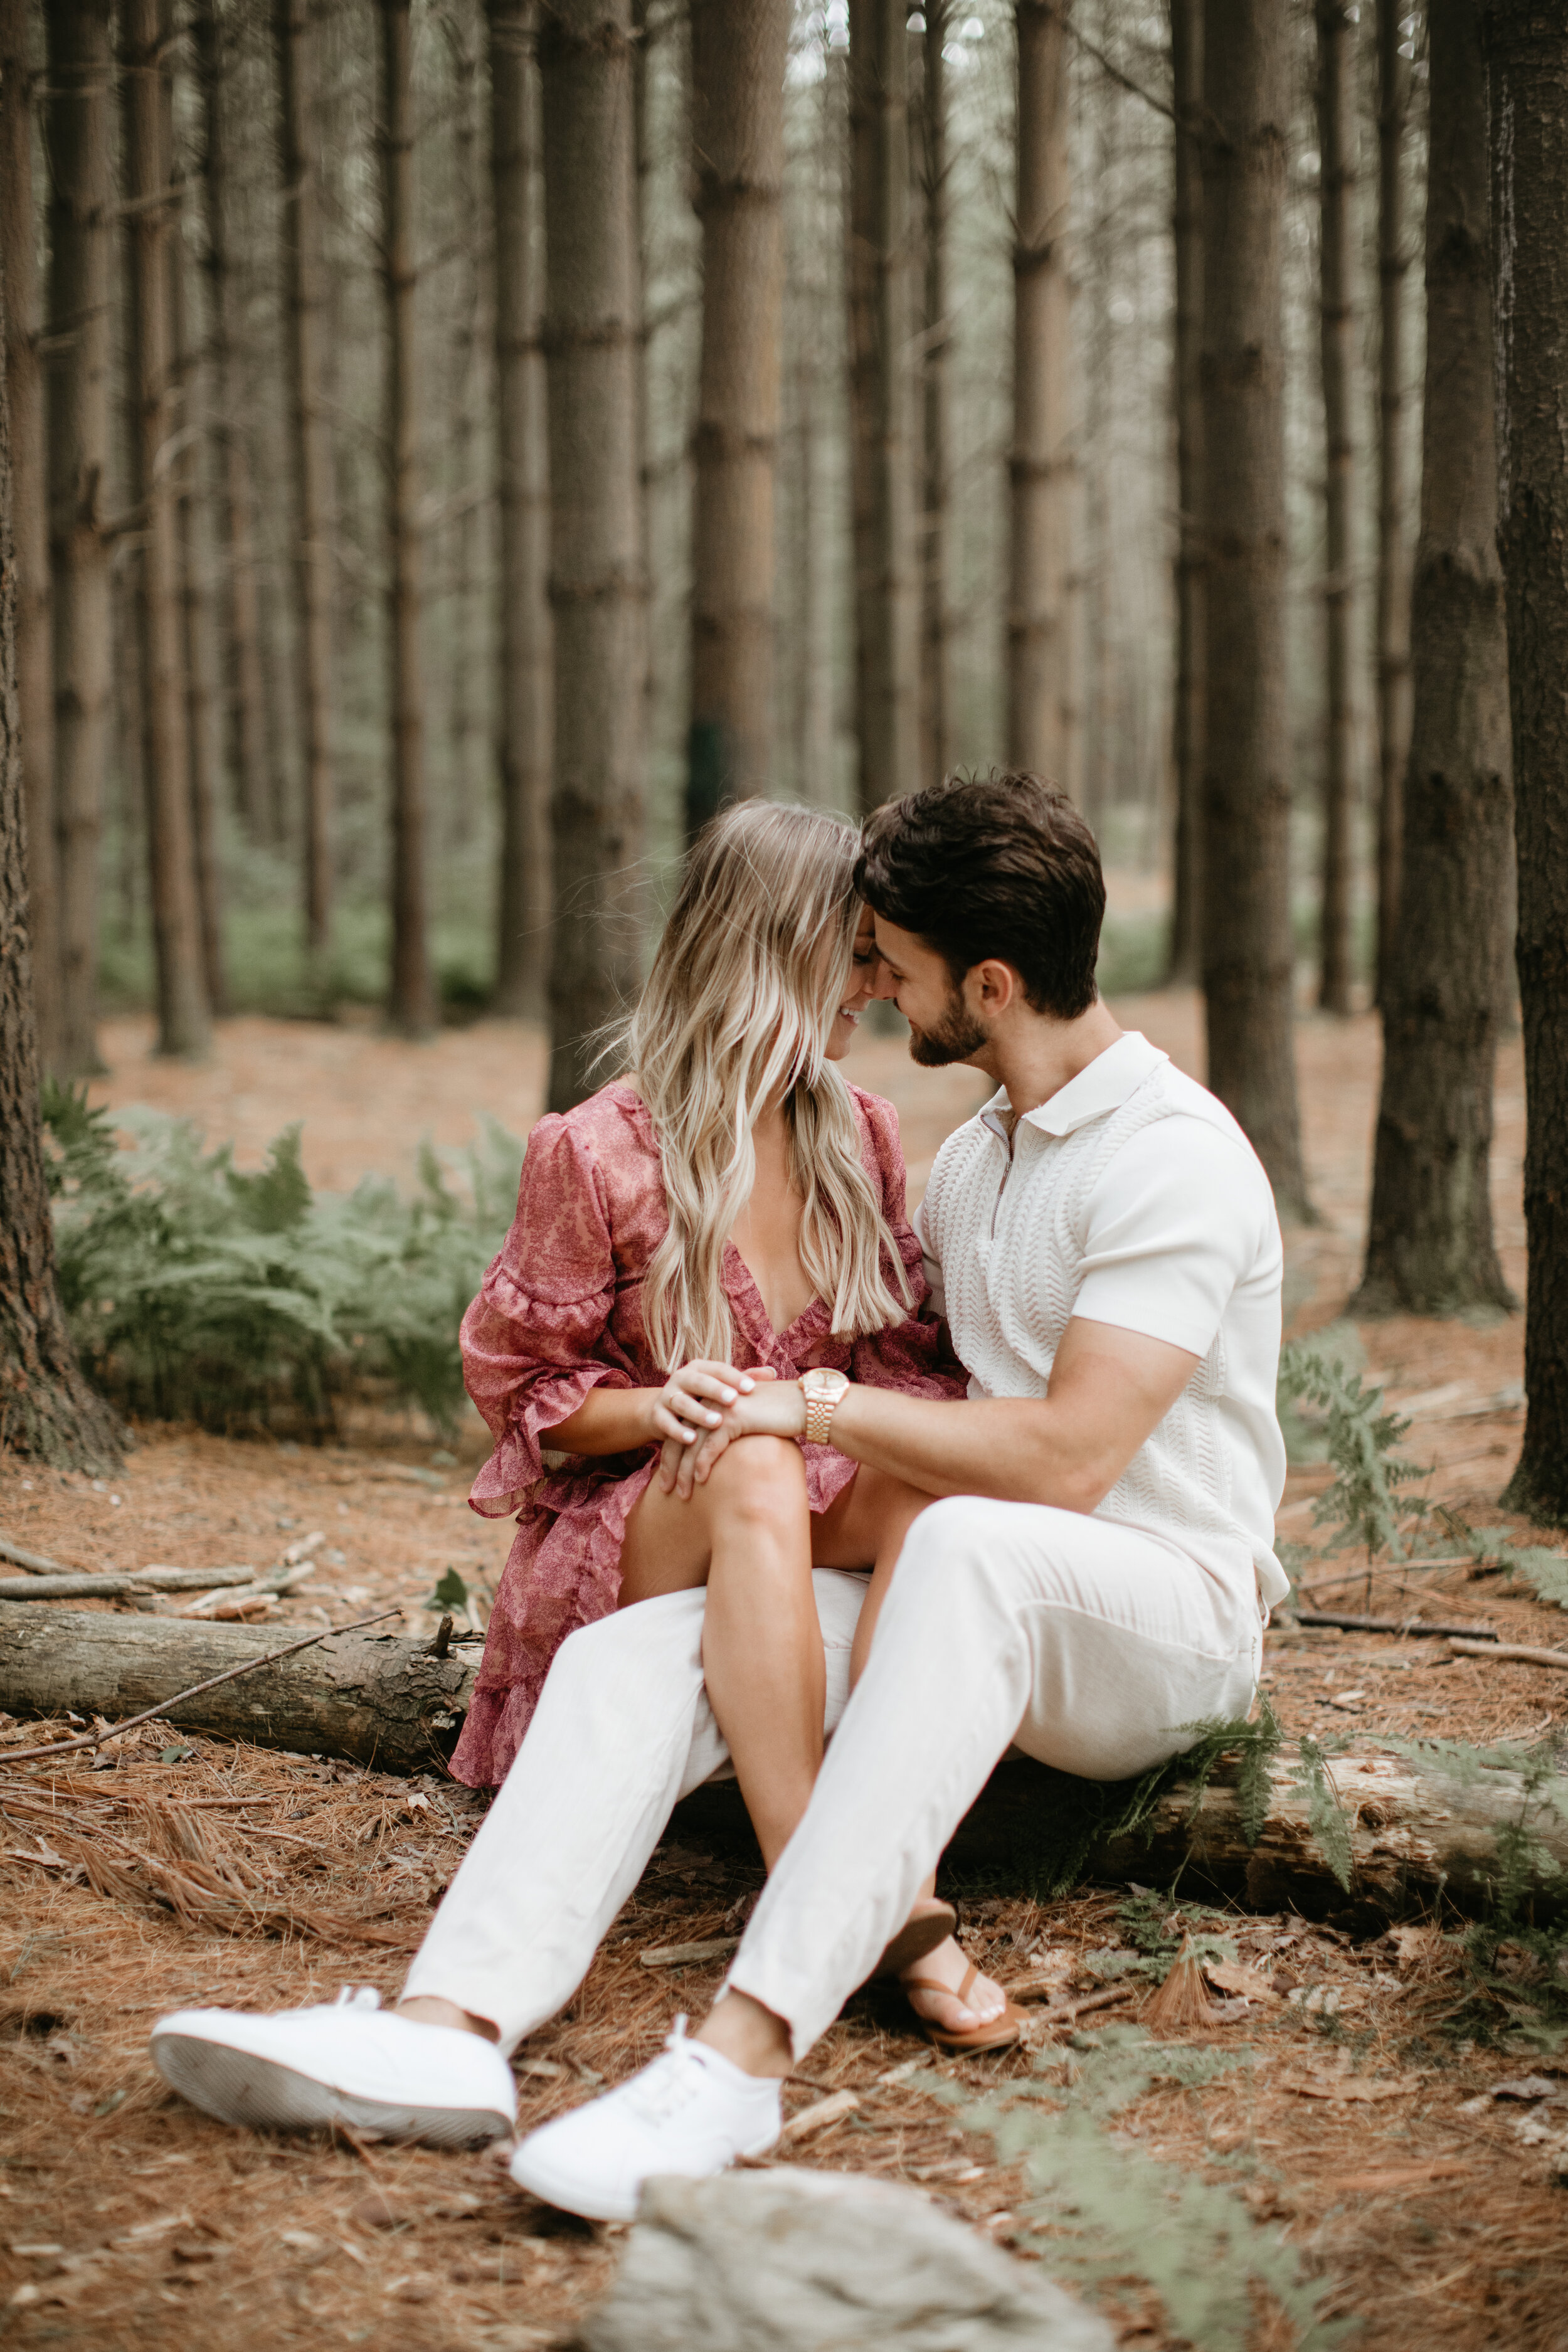 Nicole-Daacke-Photography-michaux-state-forest-elopement-adventure-engagement-session-pennsylvania-elopement-pa-elopement-photographer-gettysburg-photographer-state-park-elopement-engagement-session-pennsylvania-waterfall-109.jpg